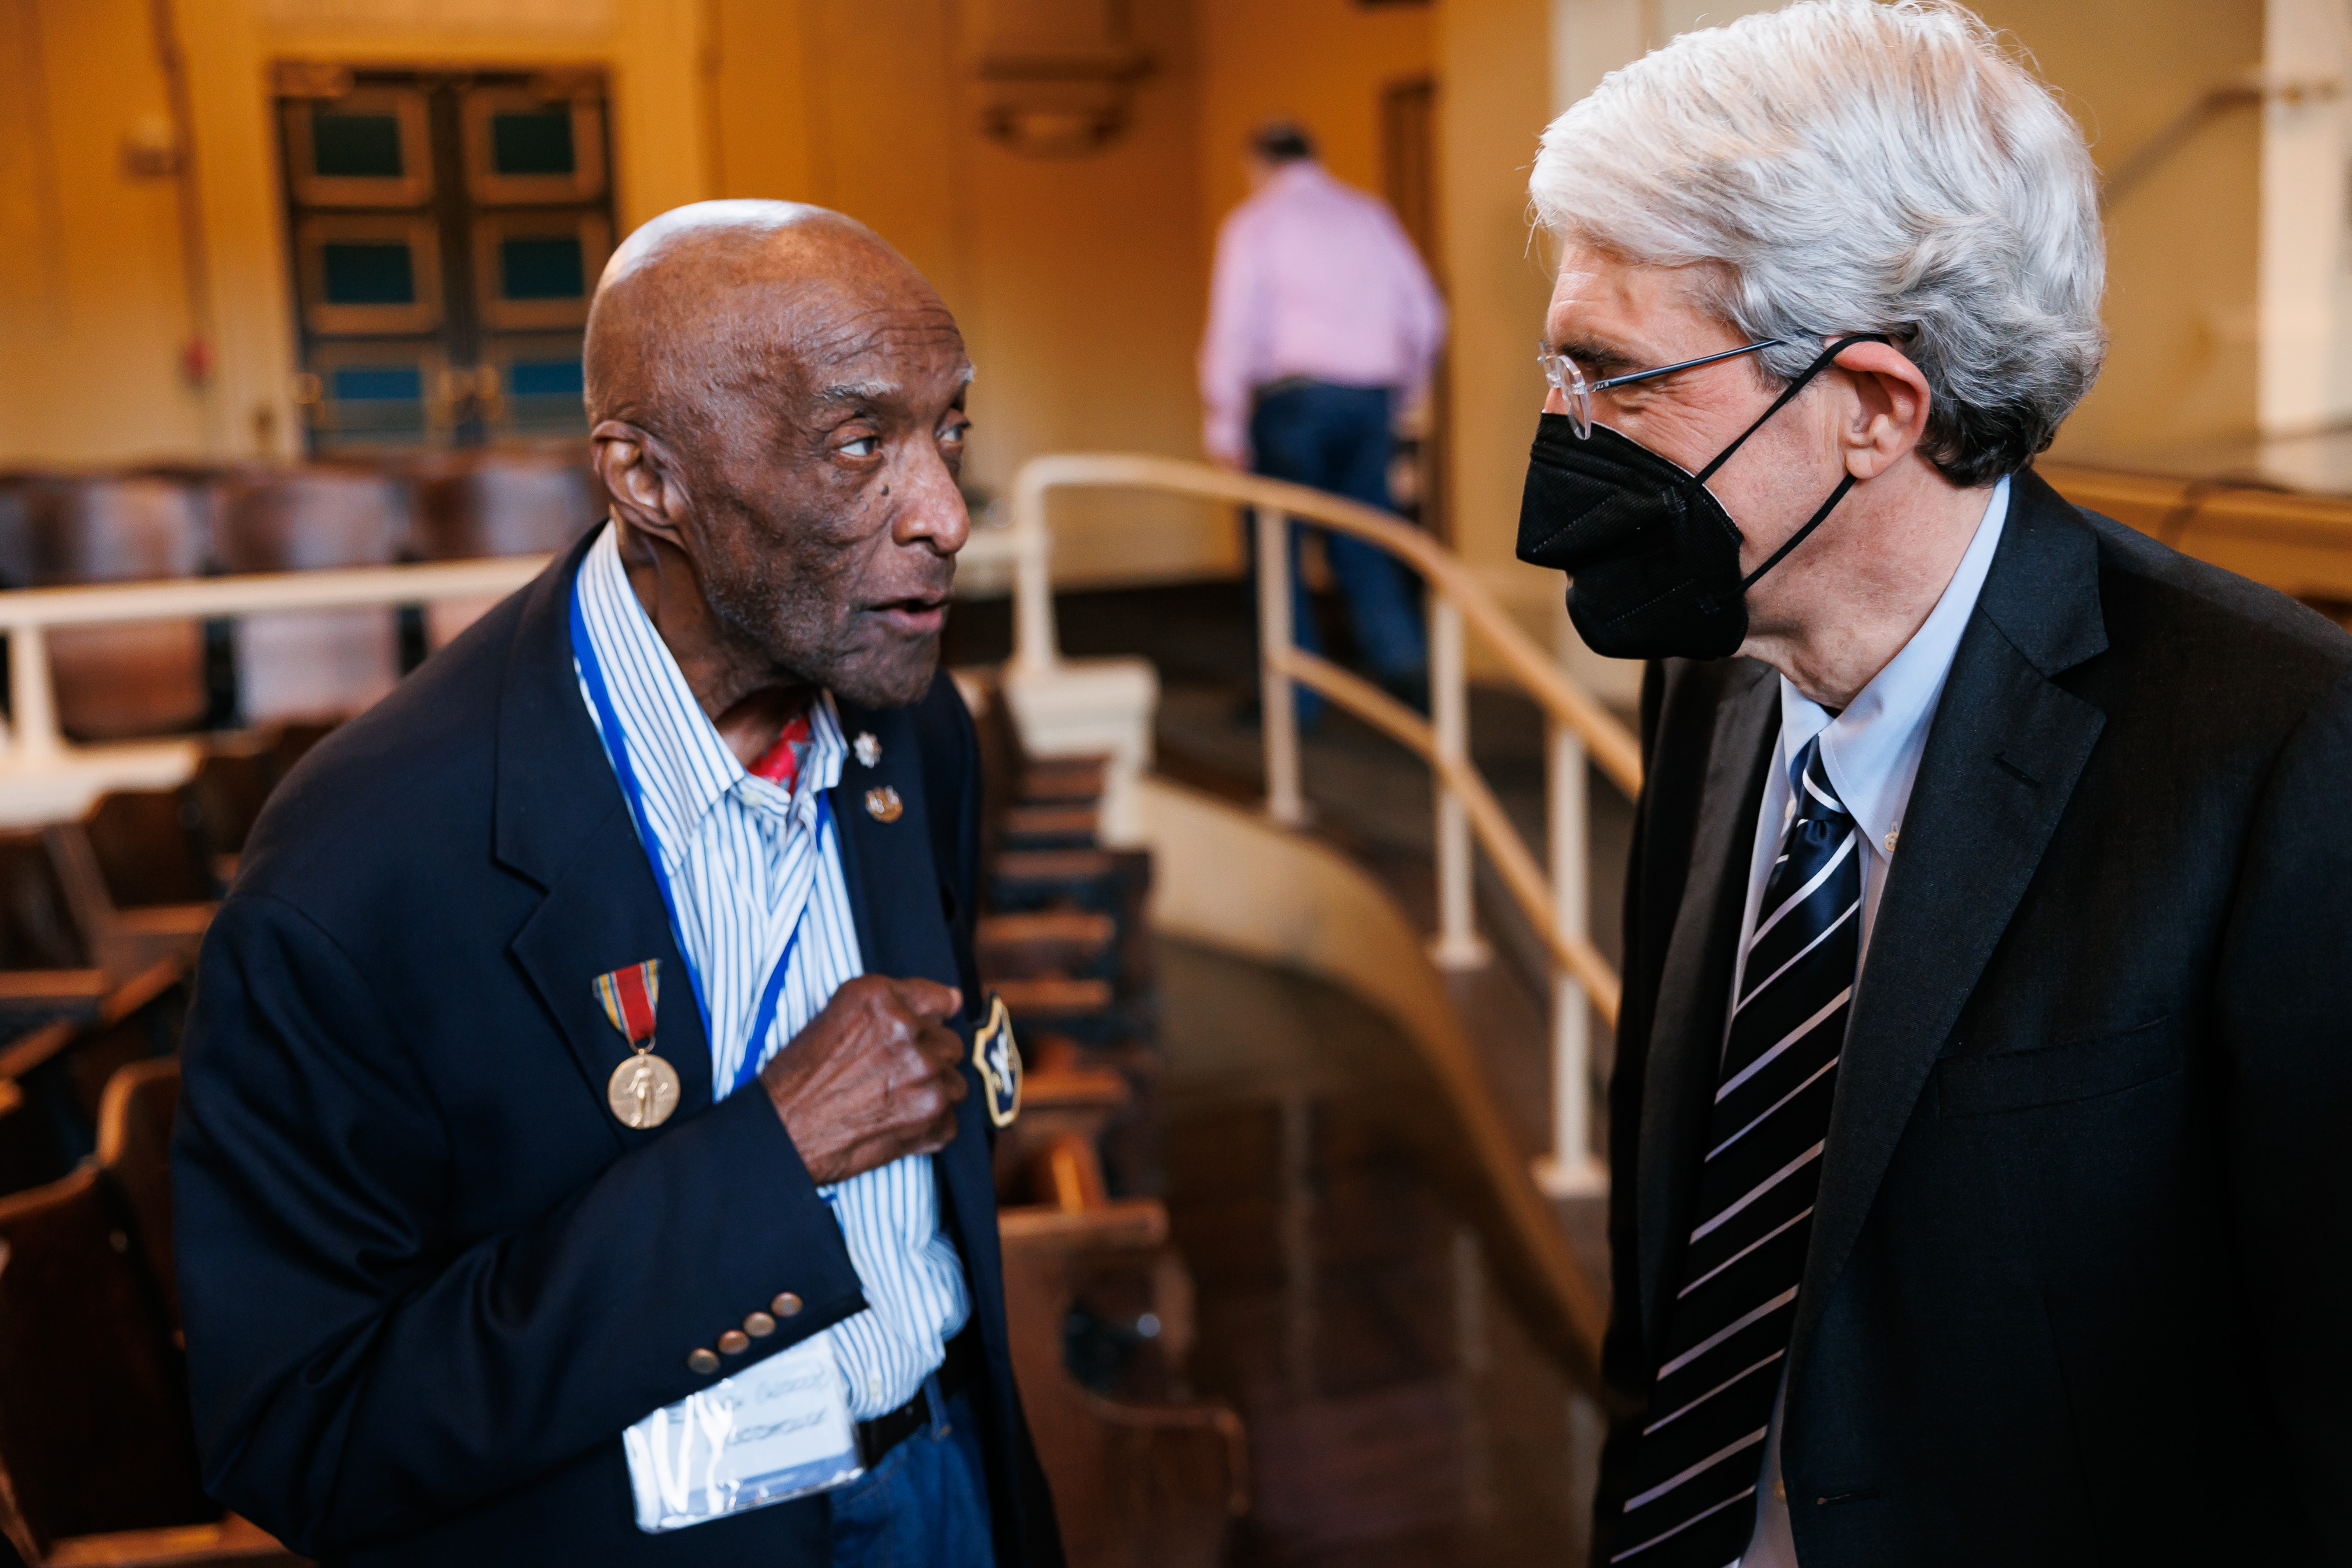 Photo: Retired Lt. Col. Enoch Woodhouse II ’52, a WWII veteran and member of the Tuskegee Airmen, talks with President Salovey '86 PhD following Salovey's university update on the first weekend of 2022 Yale College Reunions. 